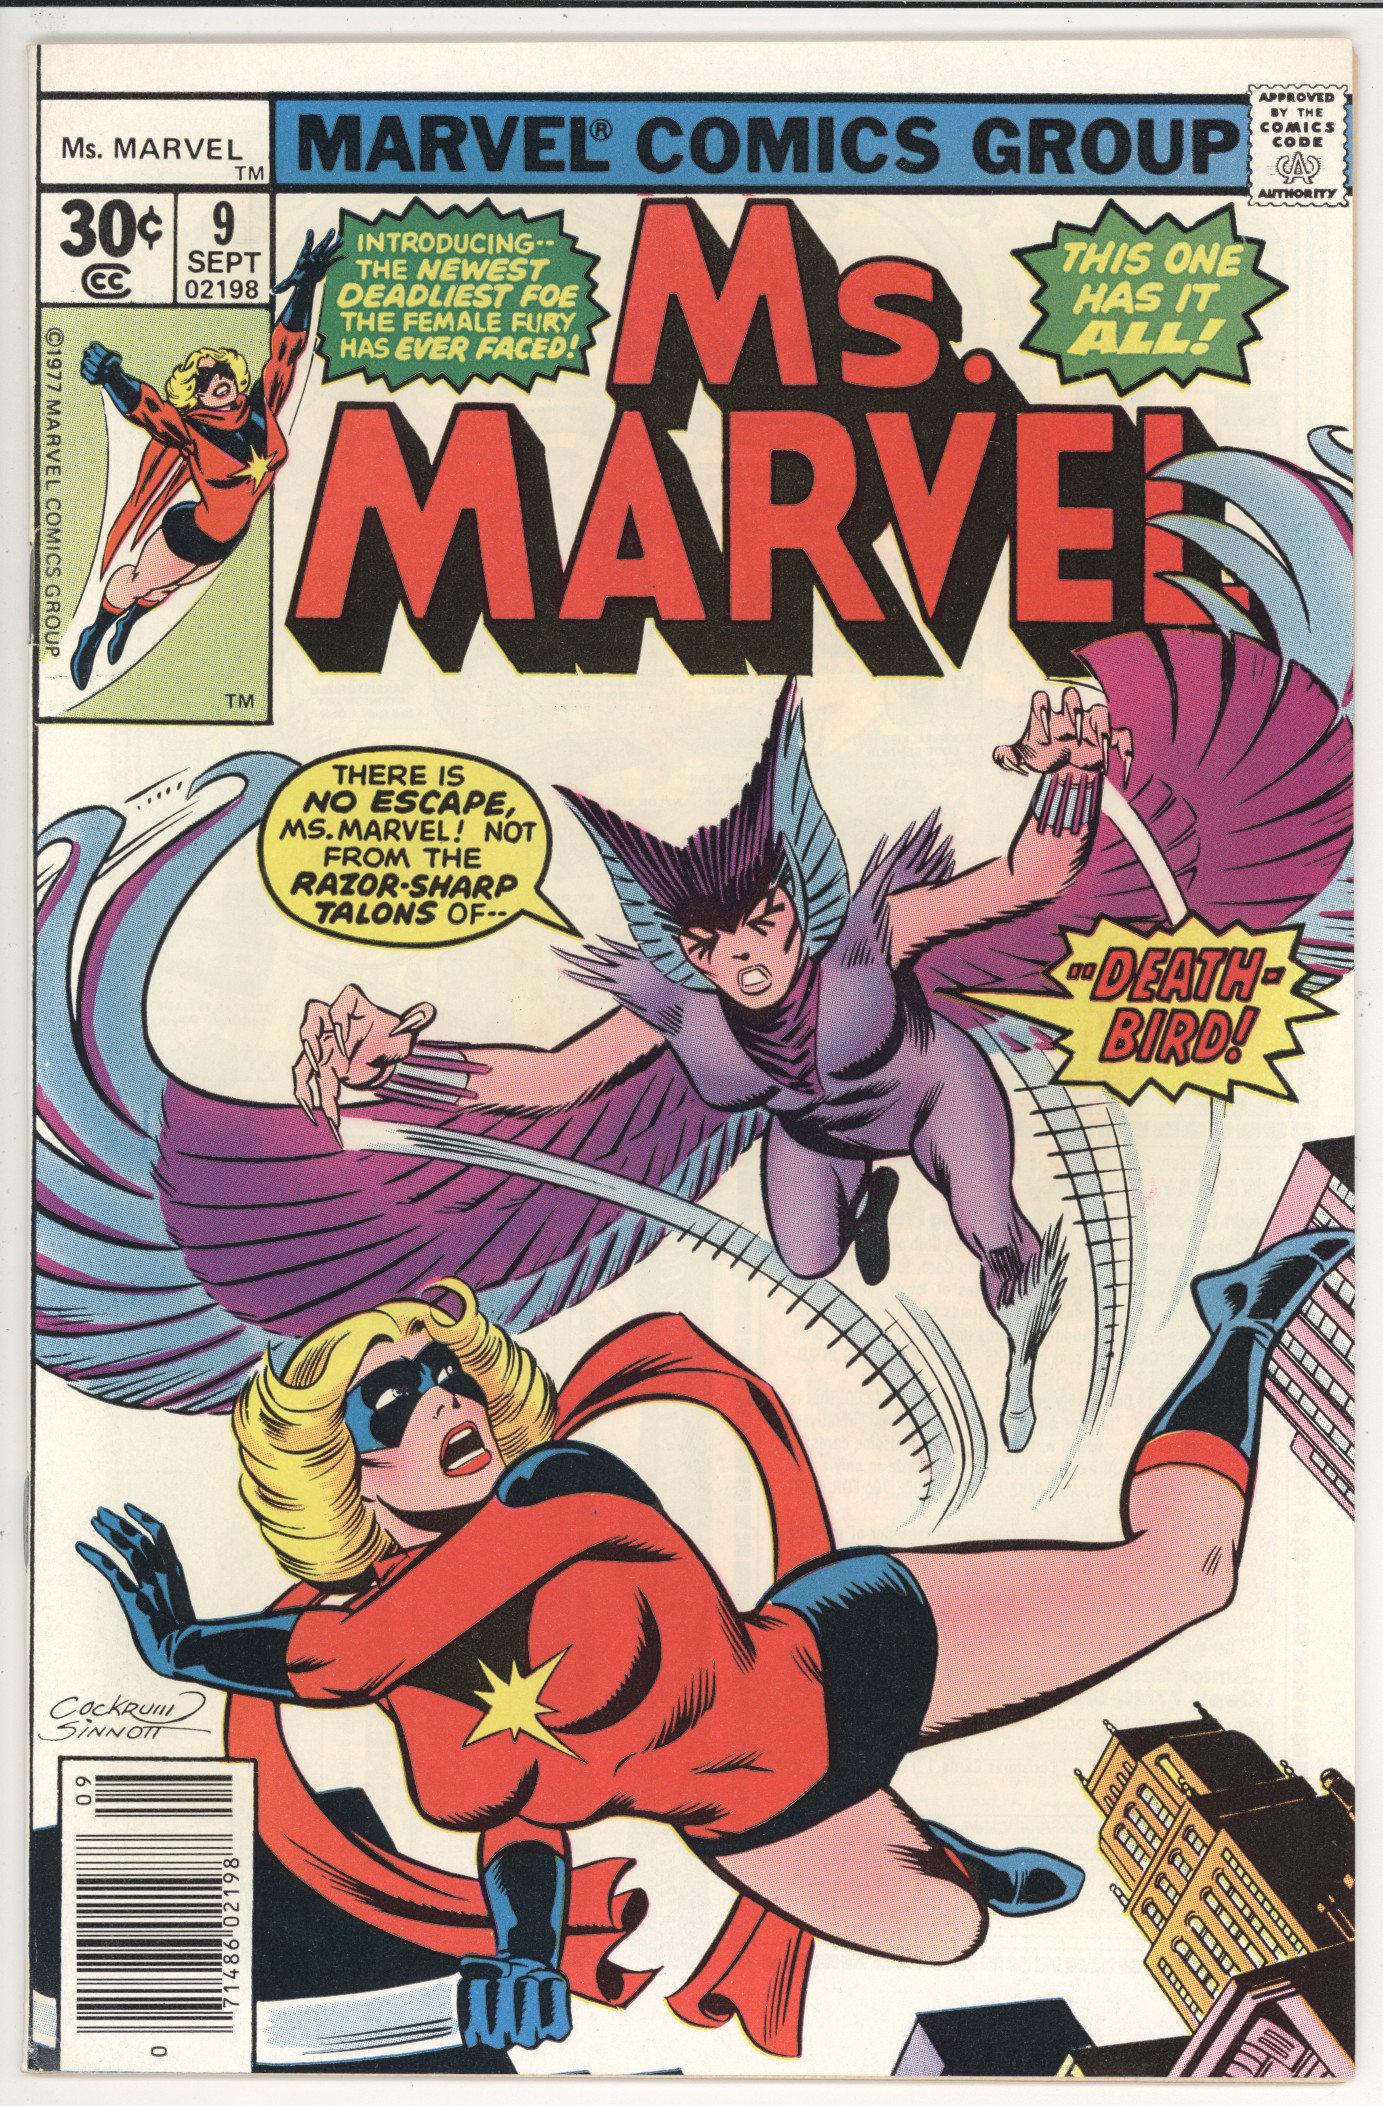 Ms. Marvel #9 front